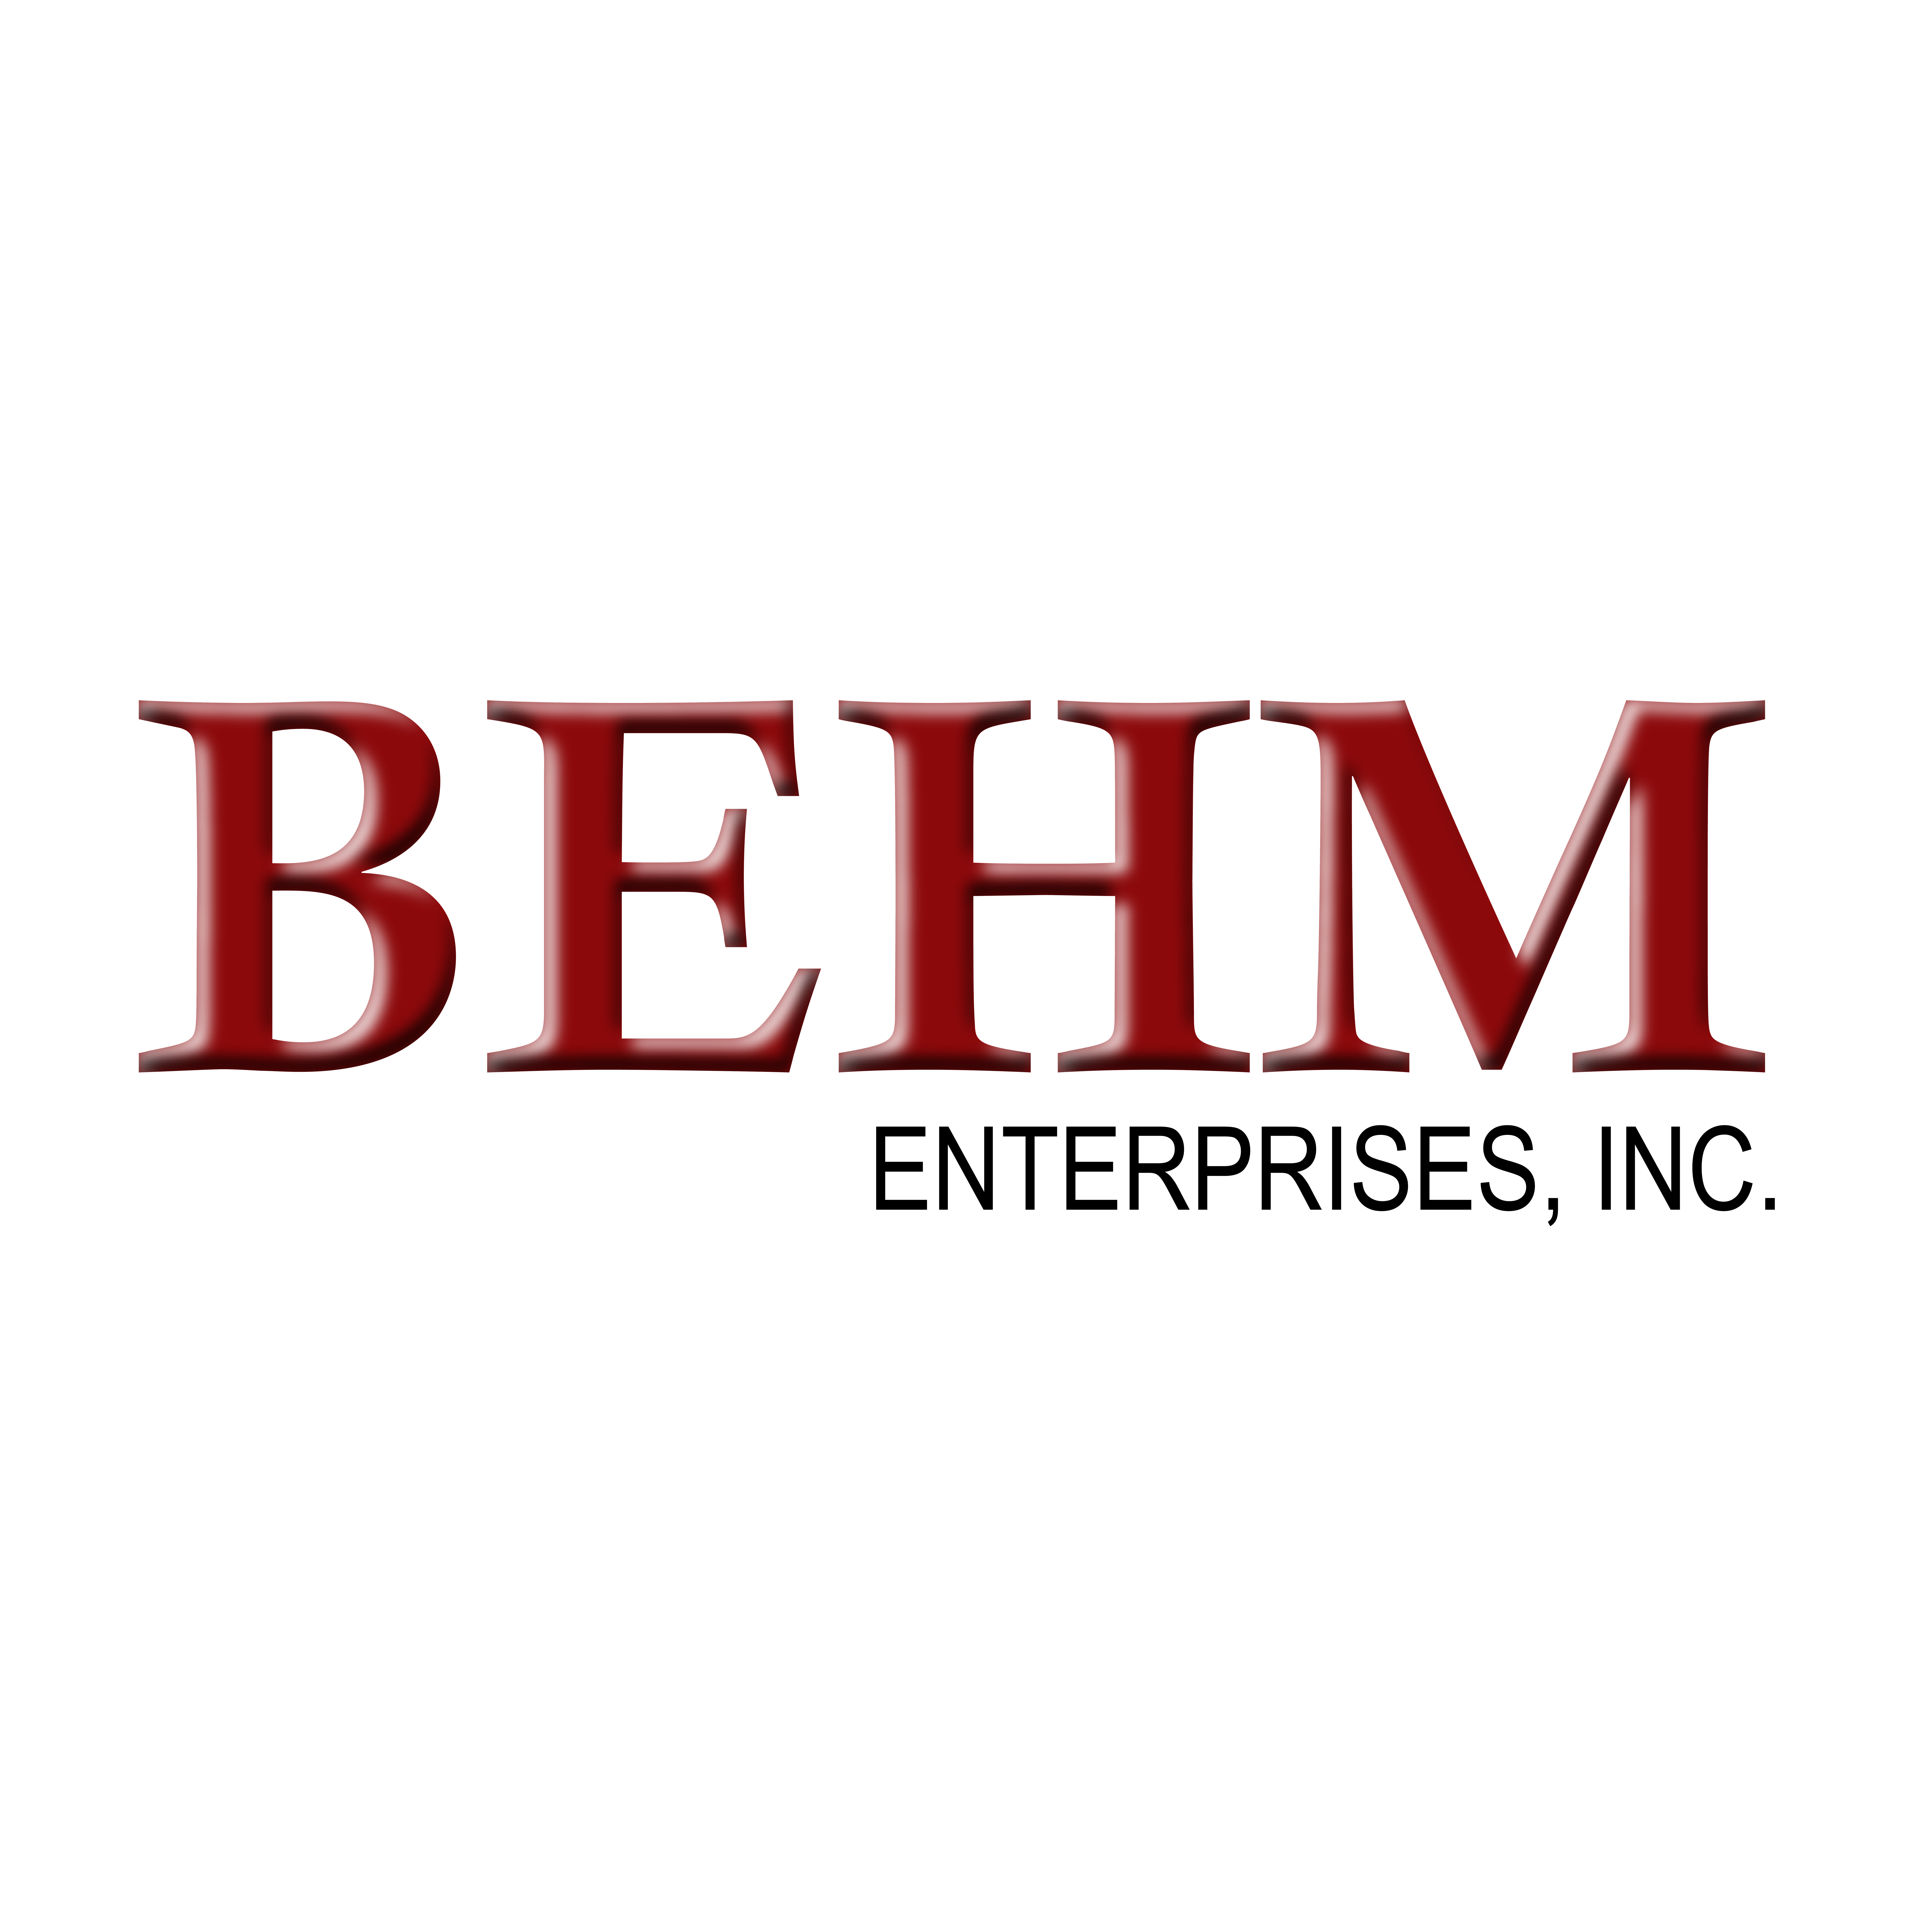 Behm Enterprises is a leading provider of underground utility installation and site development services.